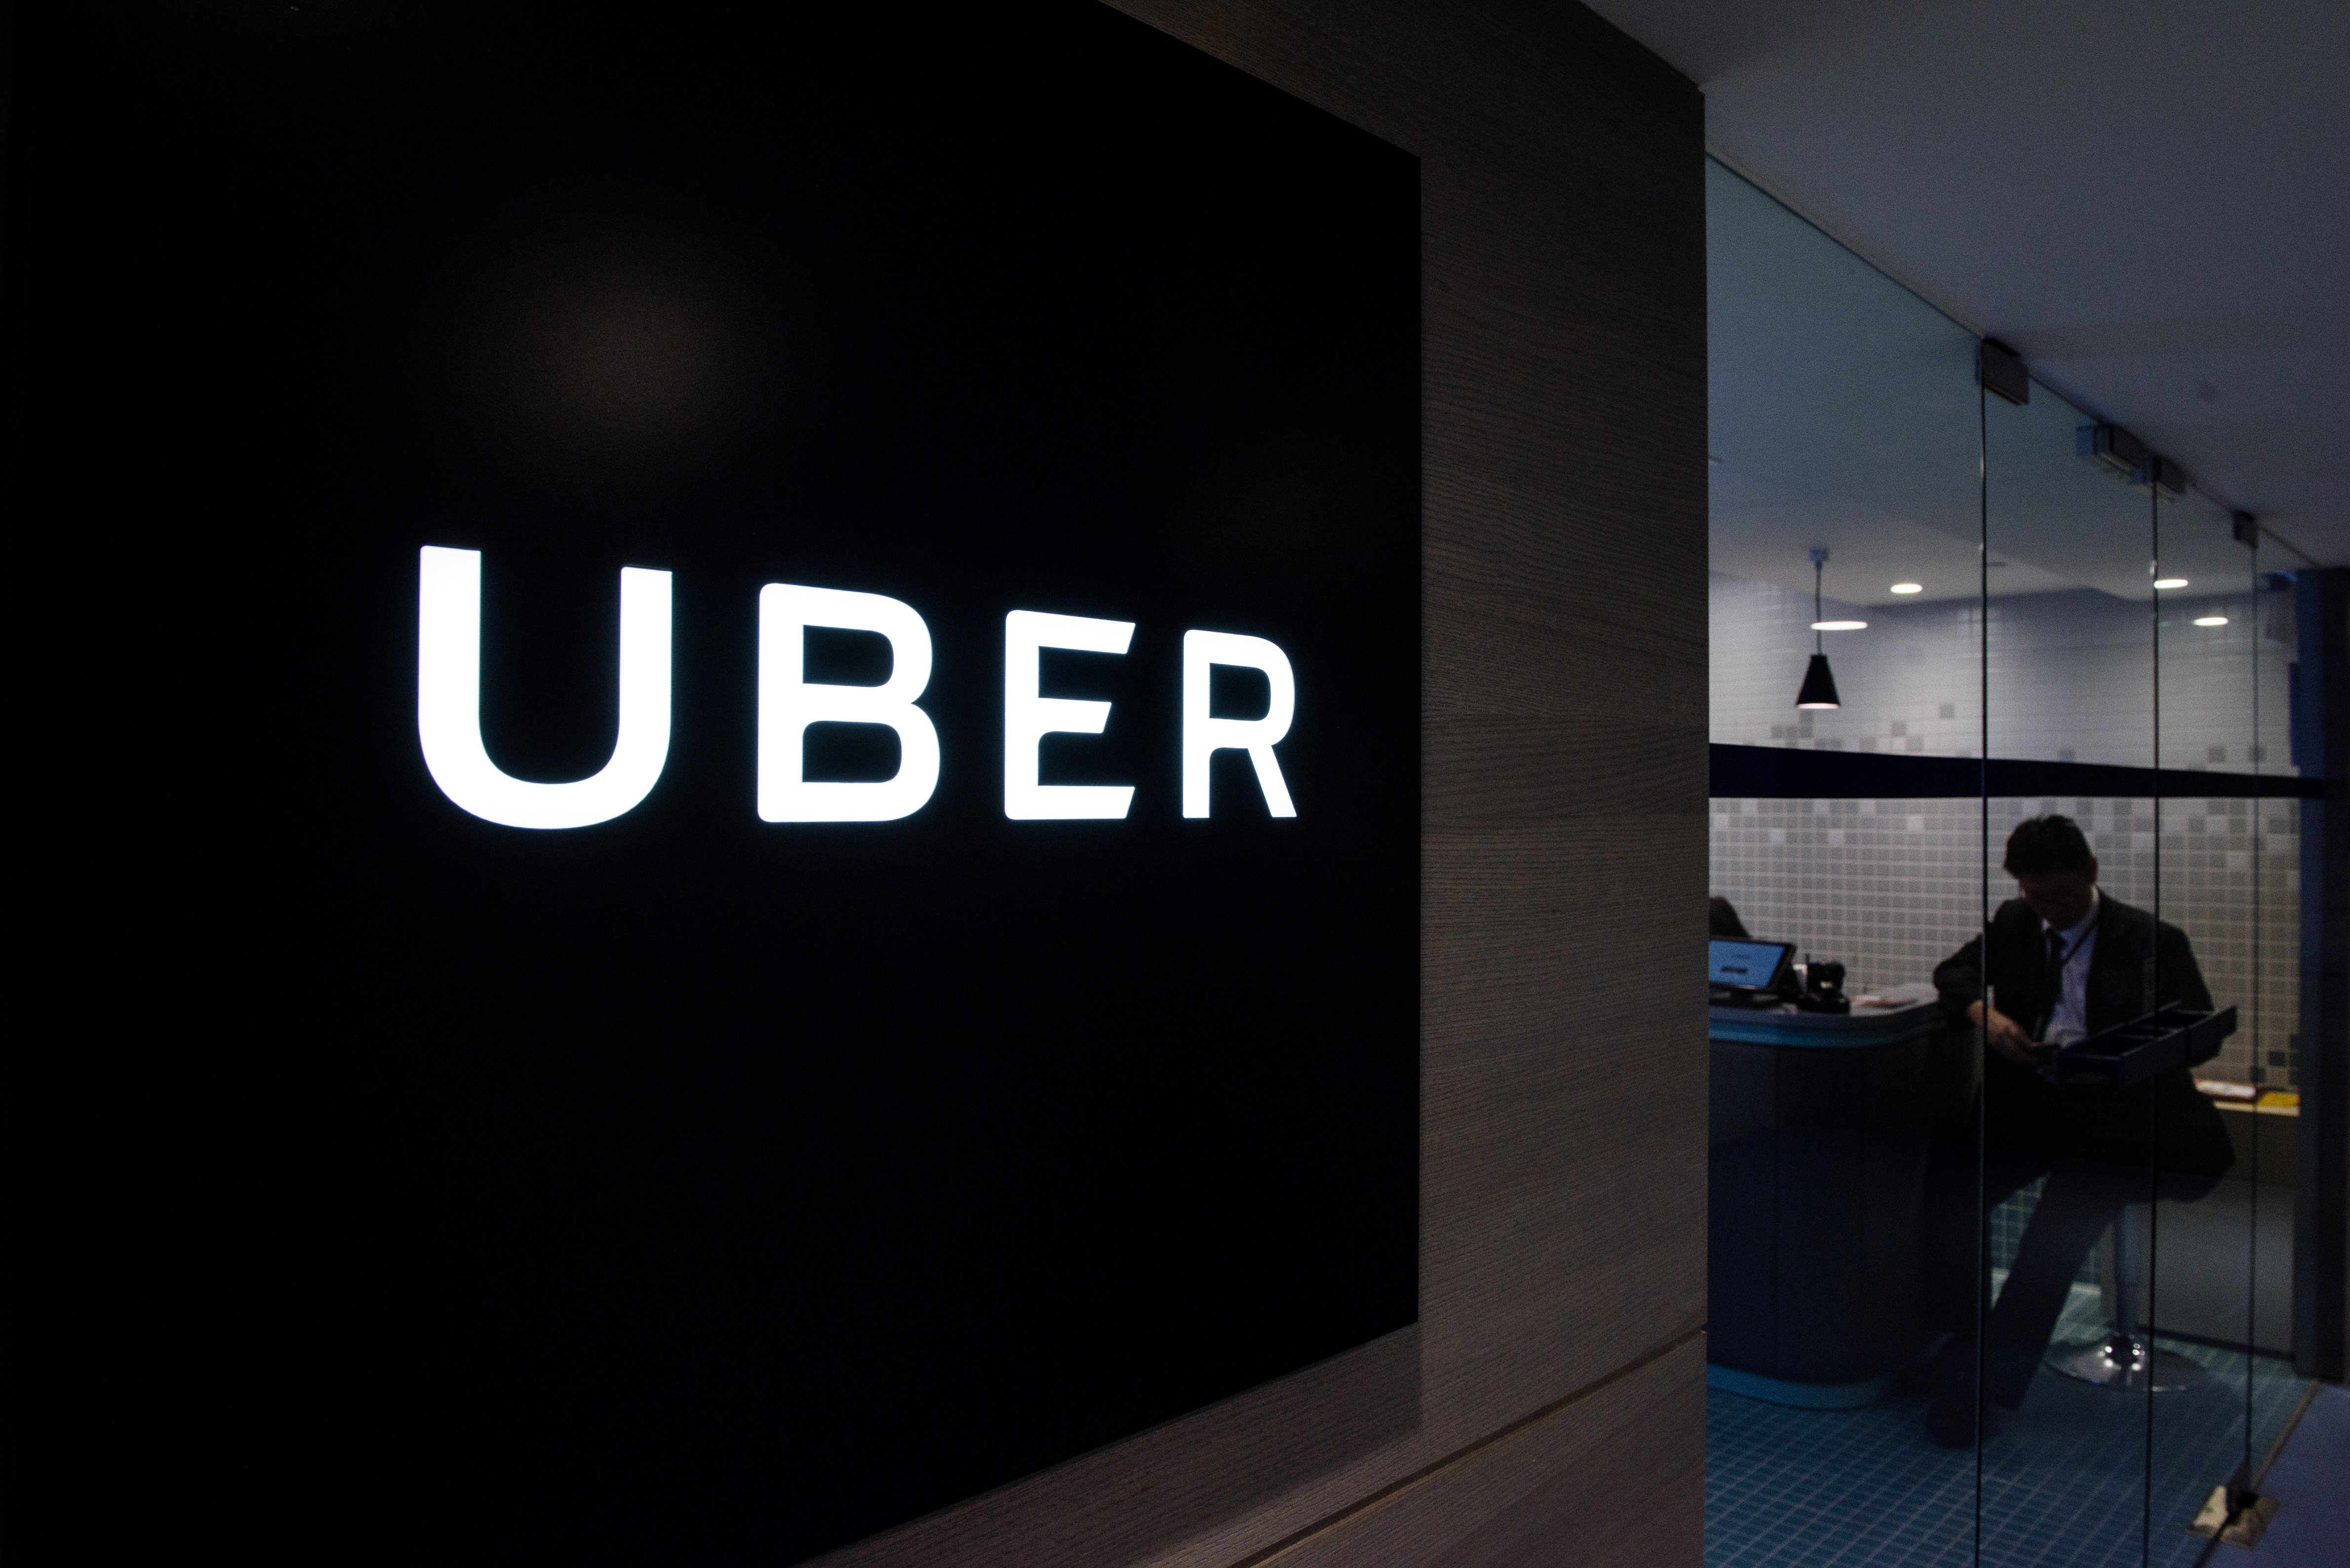 Uber signage is seen as an employee sits in the entrance of the ride-hailing giant's office in Hong Kong on March 10, 2017. (ANTHONY WALLACE&mdash;AFP/Getty Images)